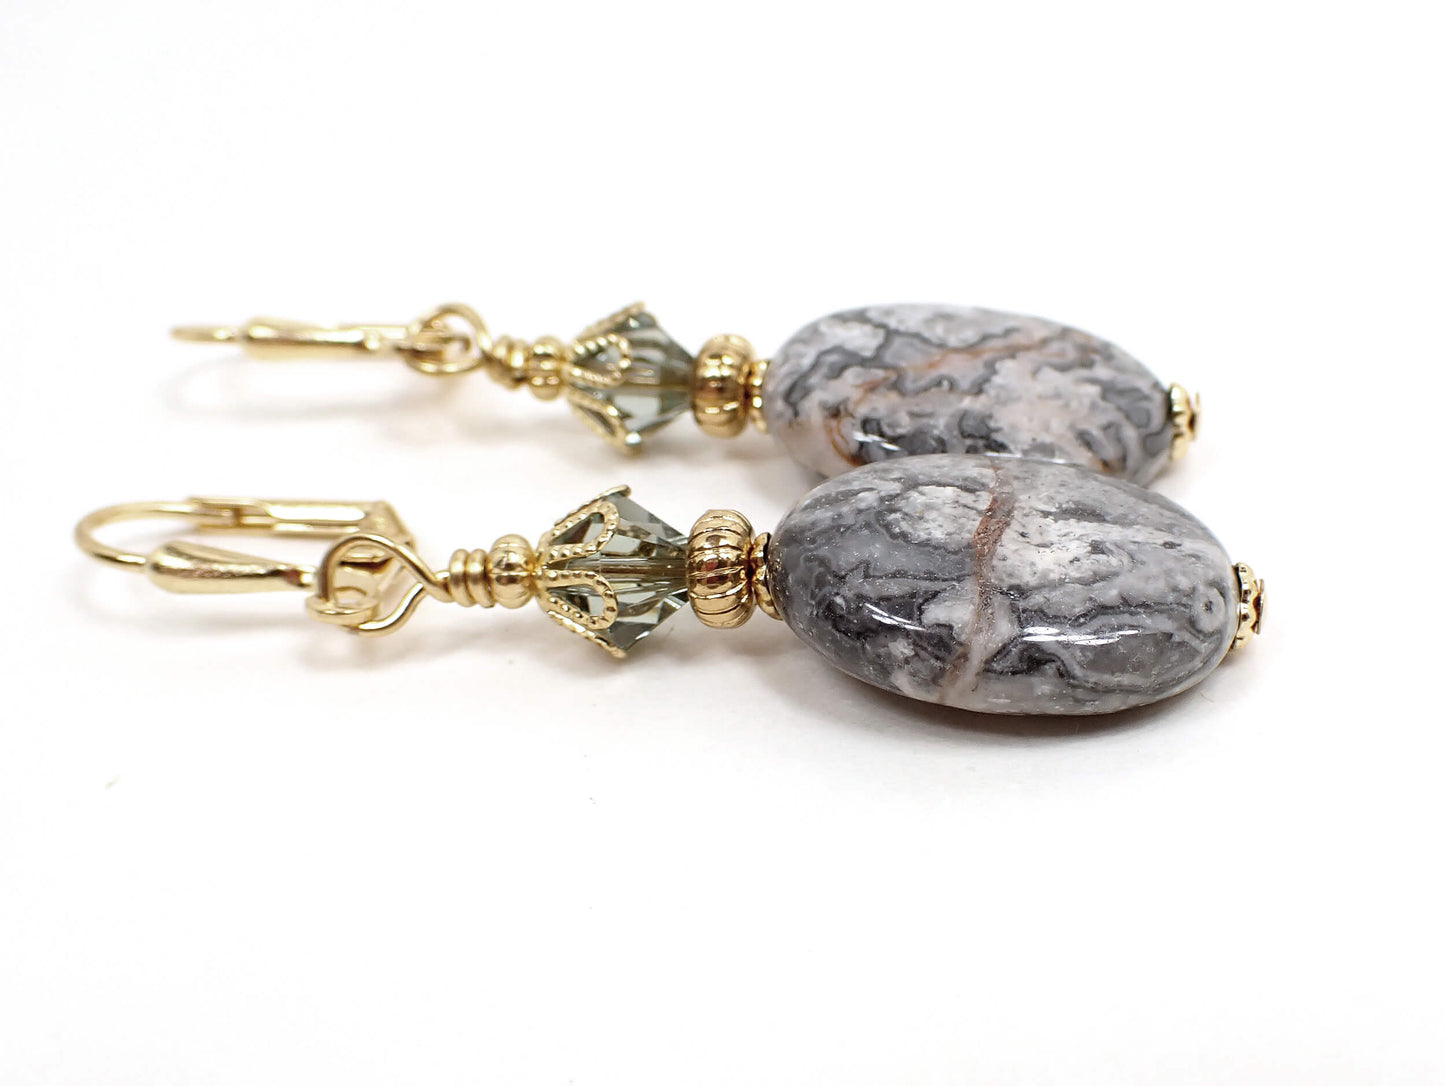 Crazy Lace Agate Gemstone Handmade Drop Earrings, Gold Plated Hook Lever Back or Clip On